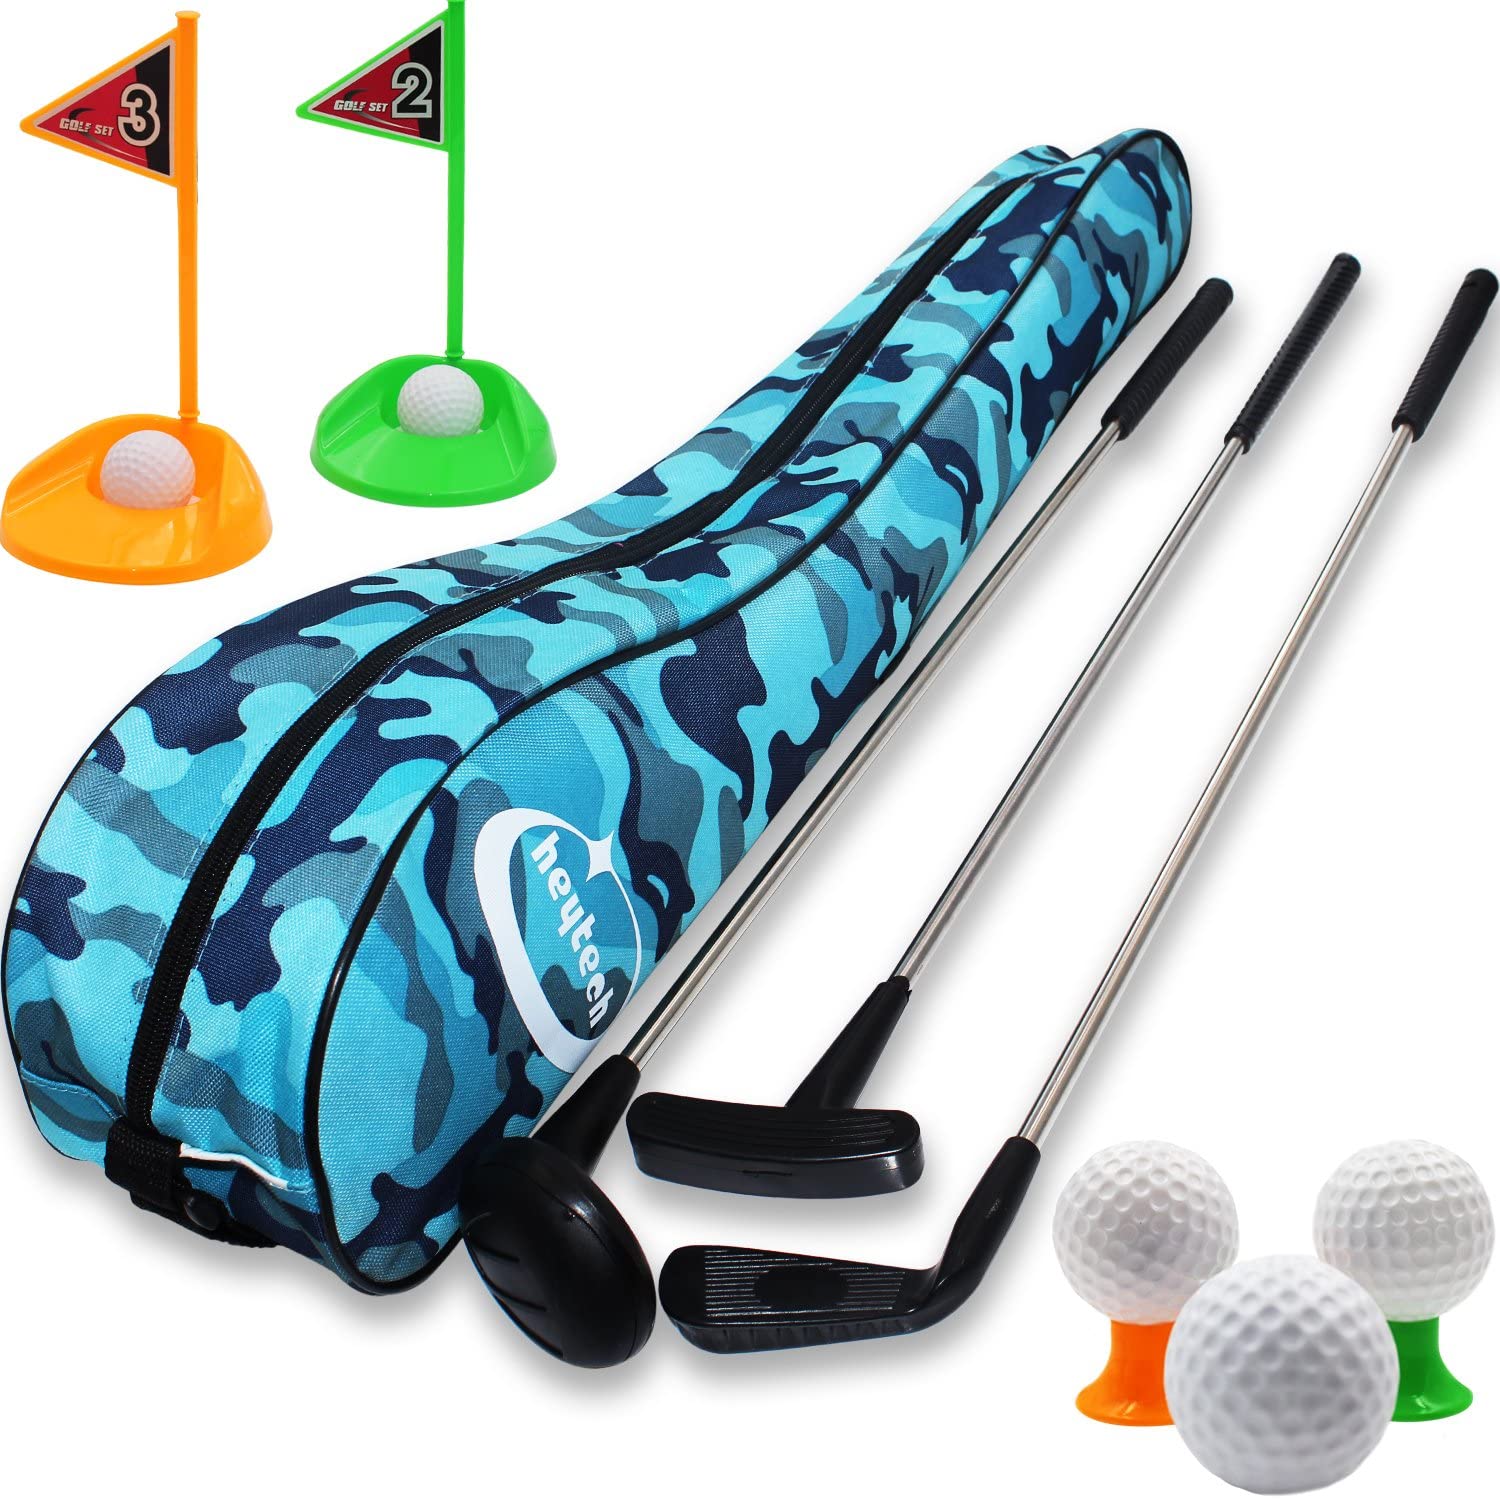 heytech Kid's Toy Golf Clubs Set Deluxe Outdoor Golf Toy Set Toddler, Children, Preschool Kids Early Educational Toy